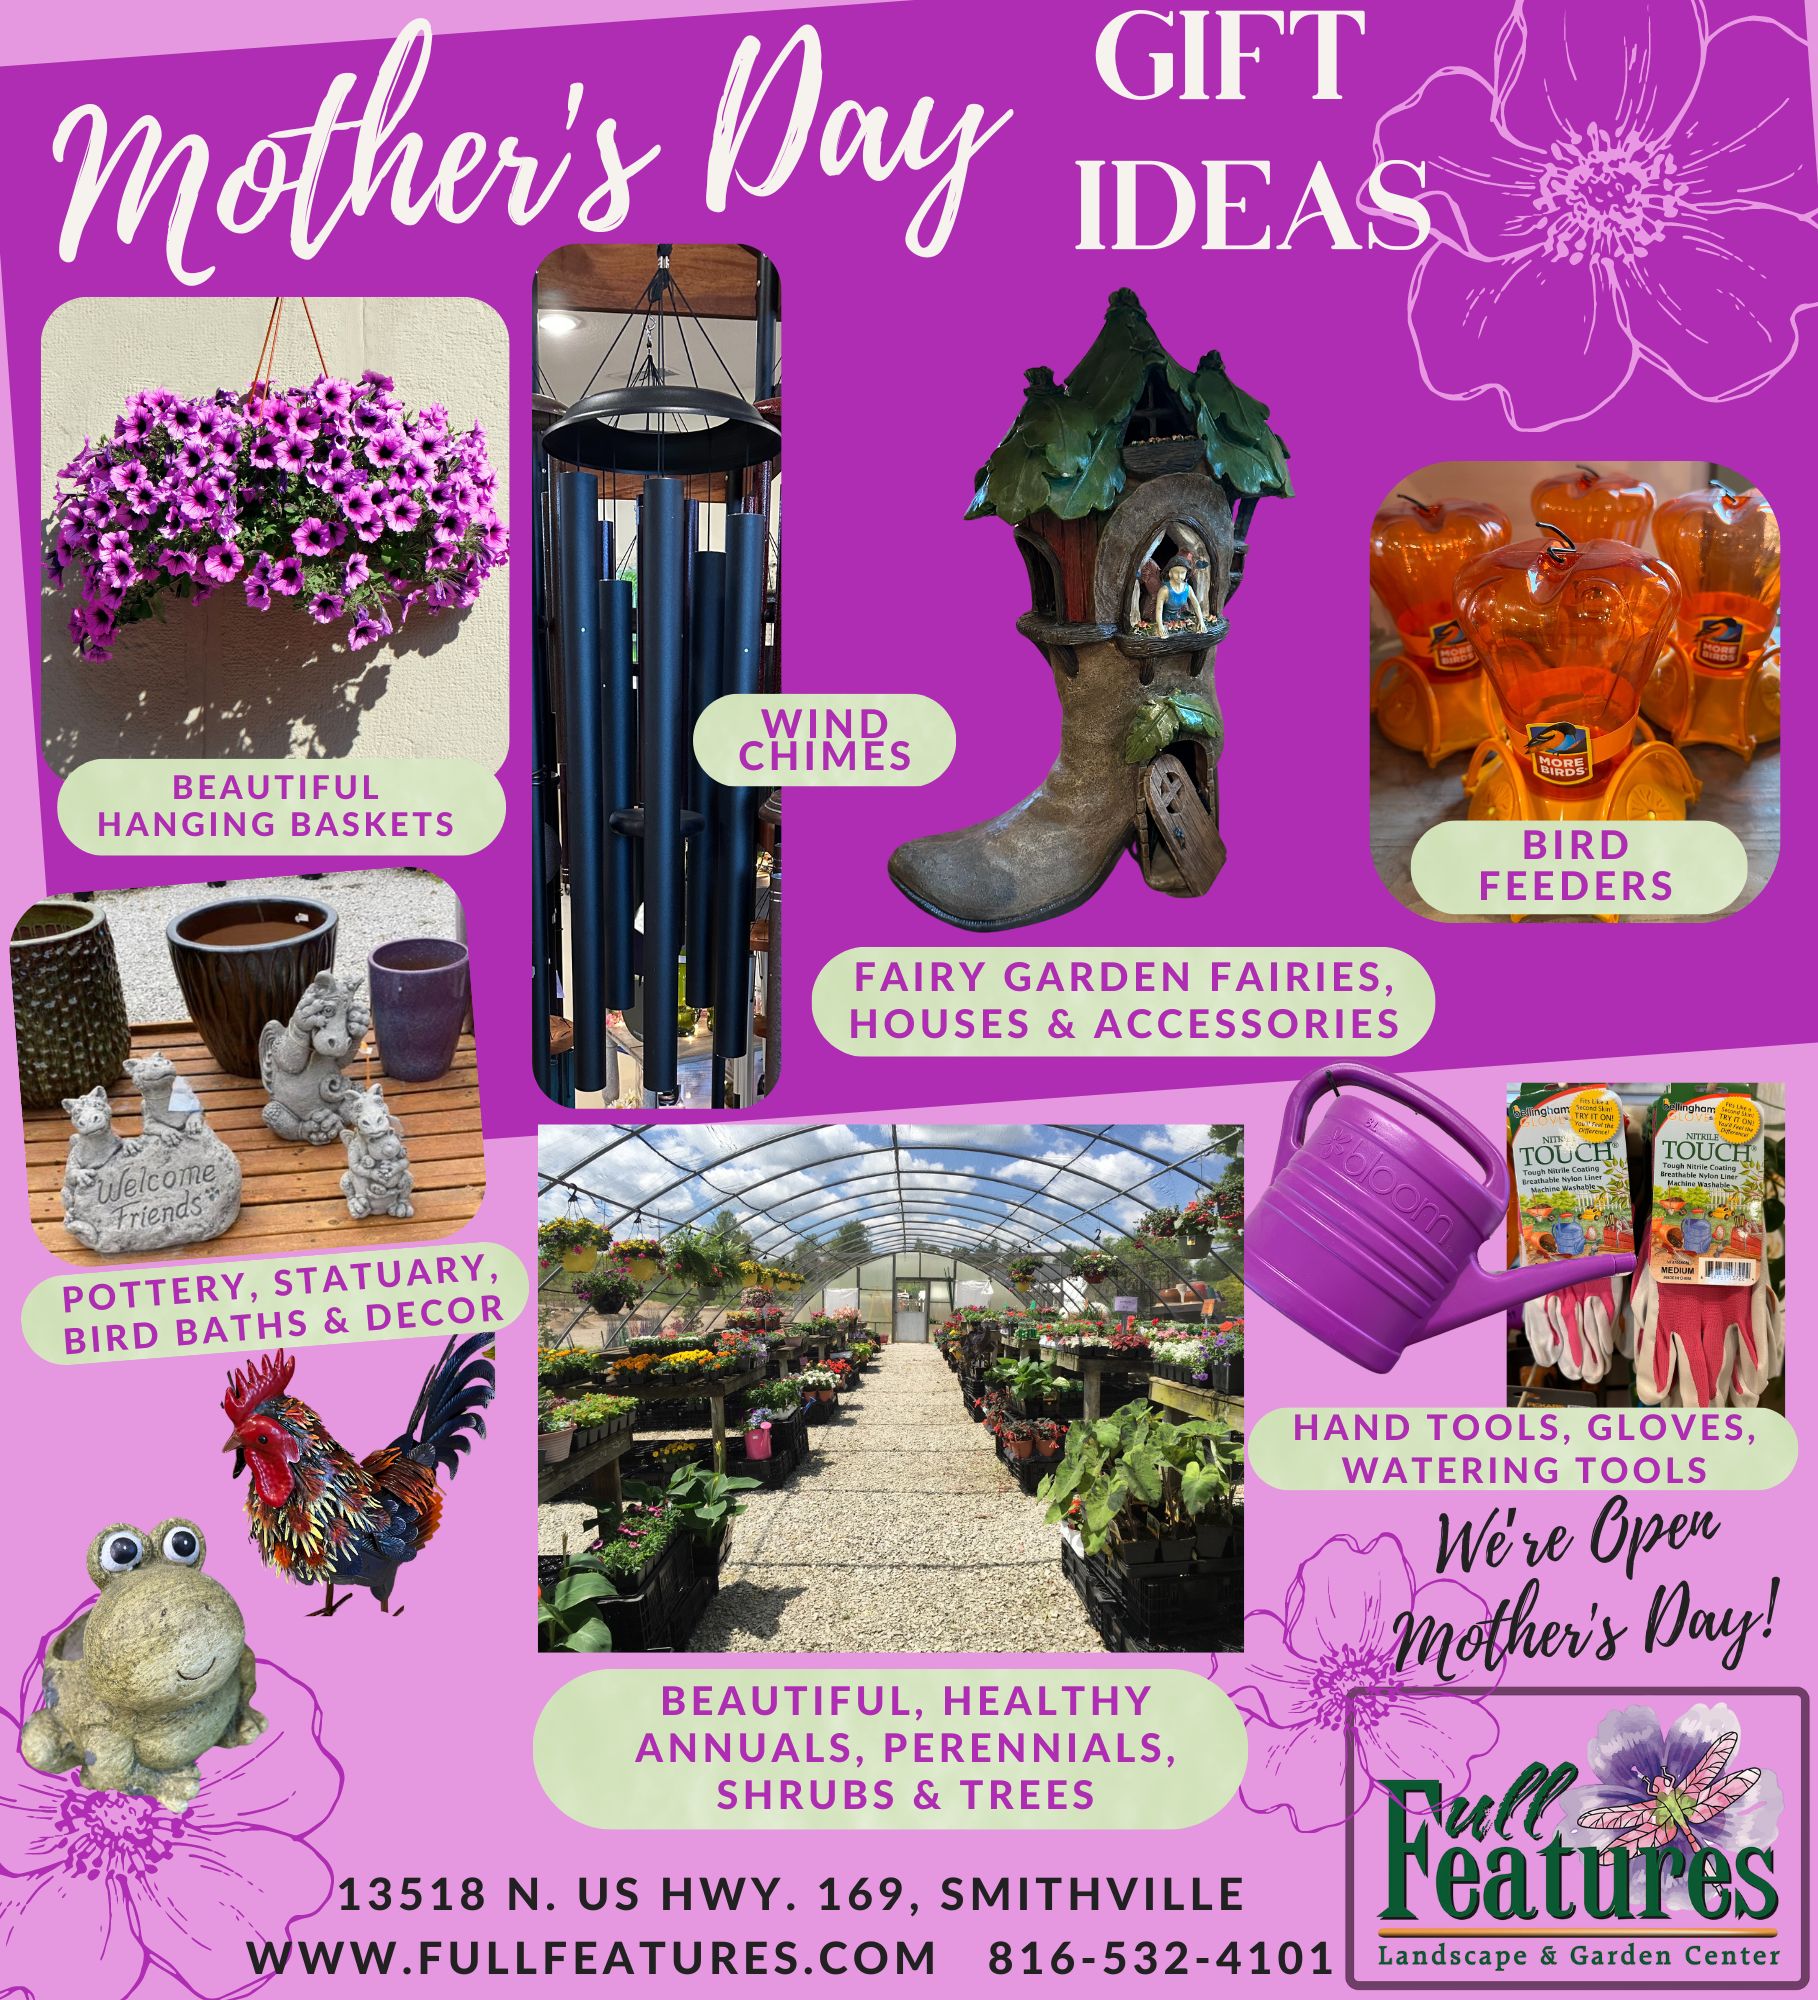 An ad for Mother's Day gift ideas from Full Features Landscape  & Garden Center. 